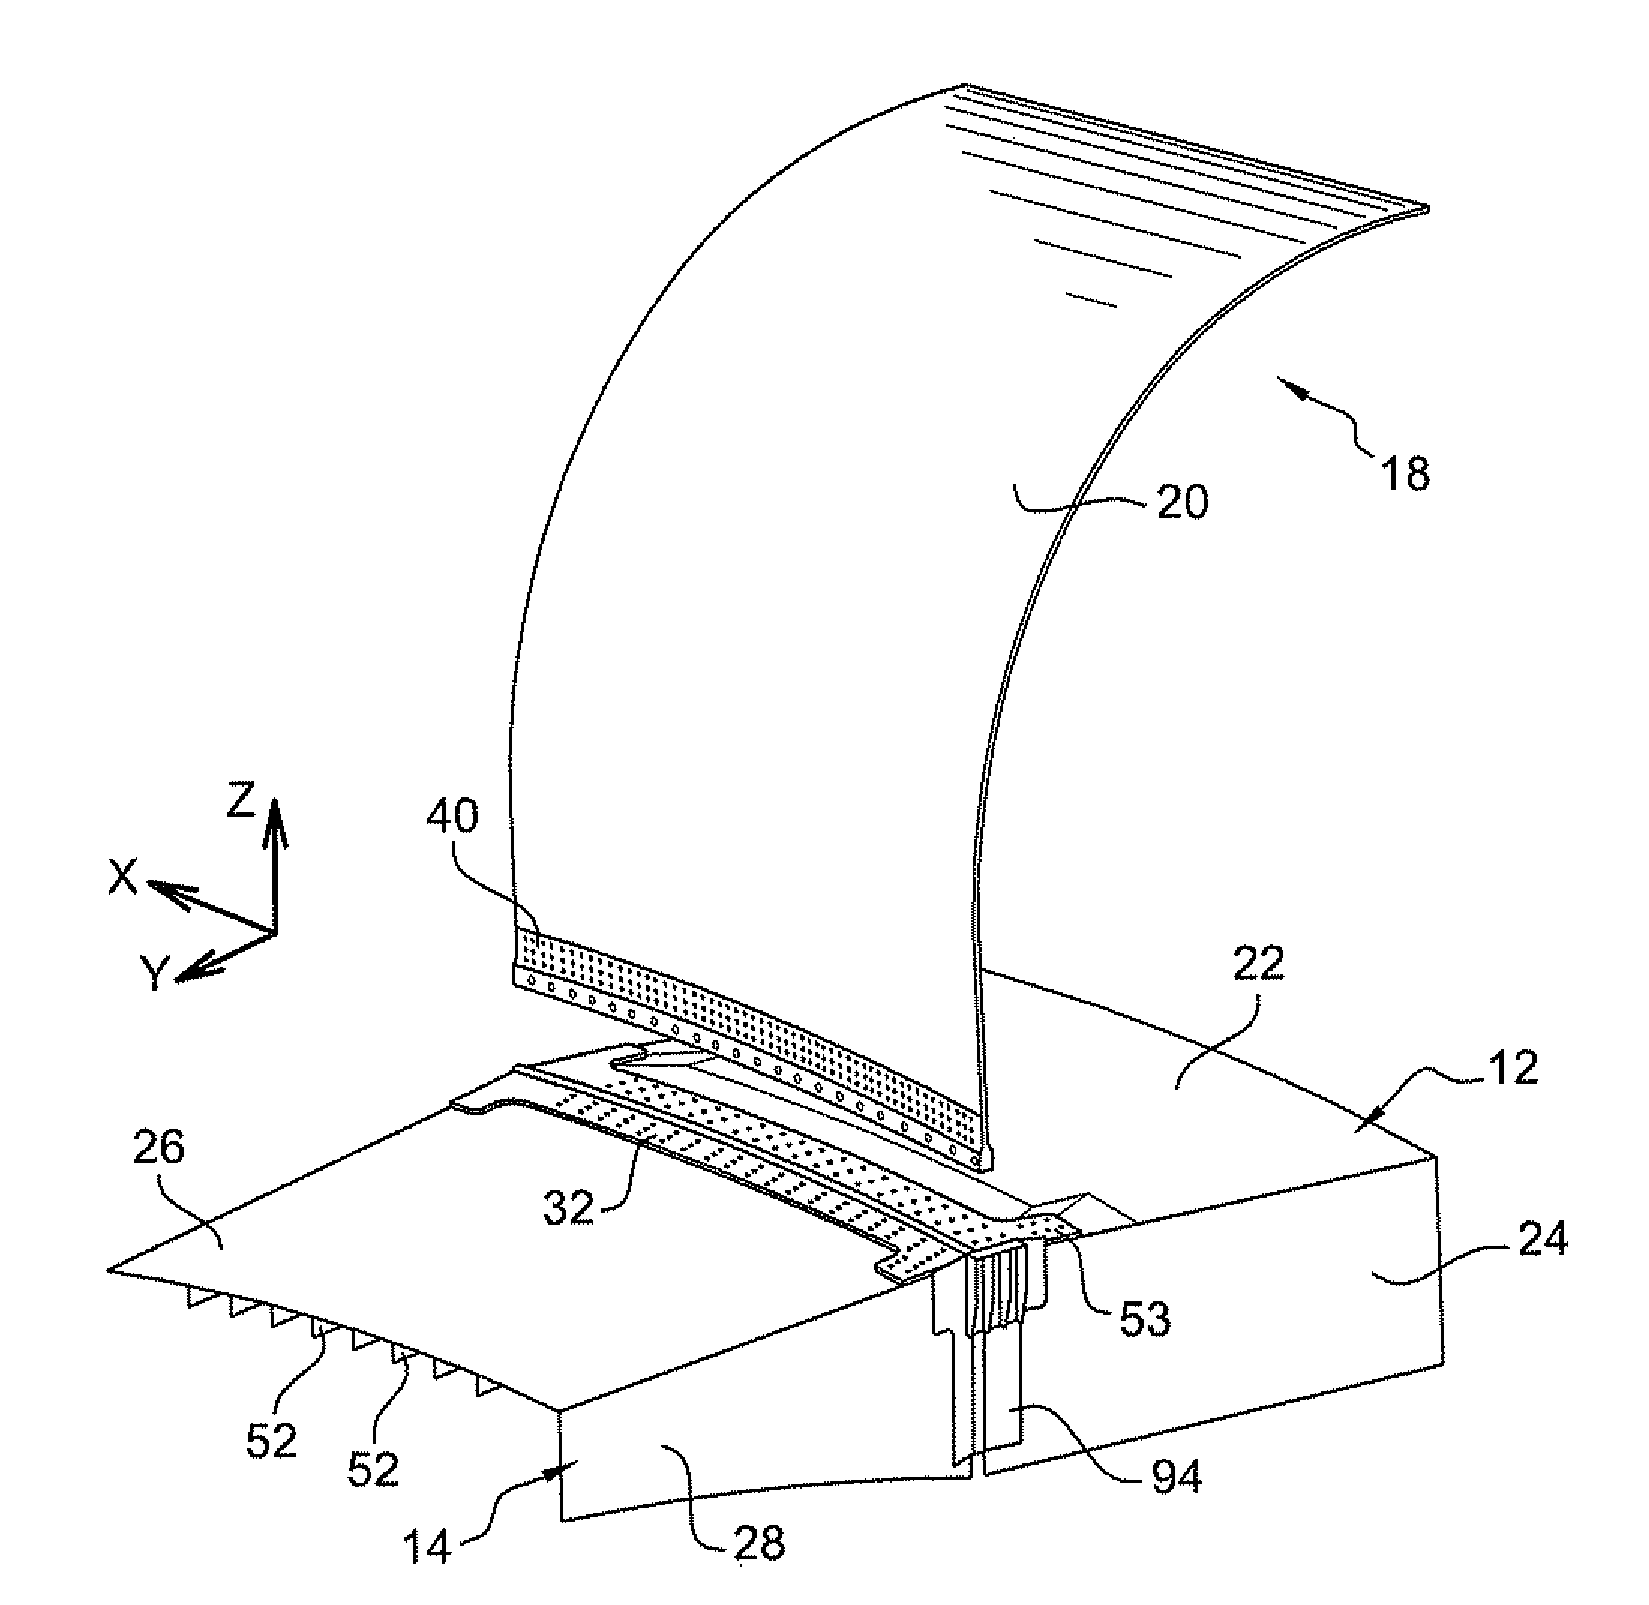 Method of constructing a fixed-wing aircraft